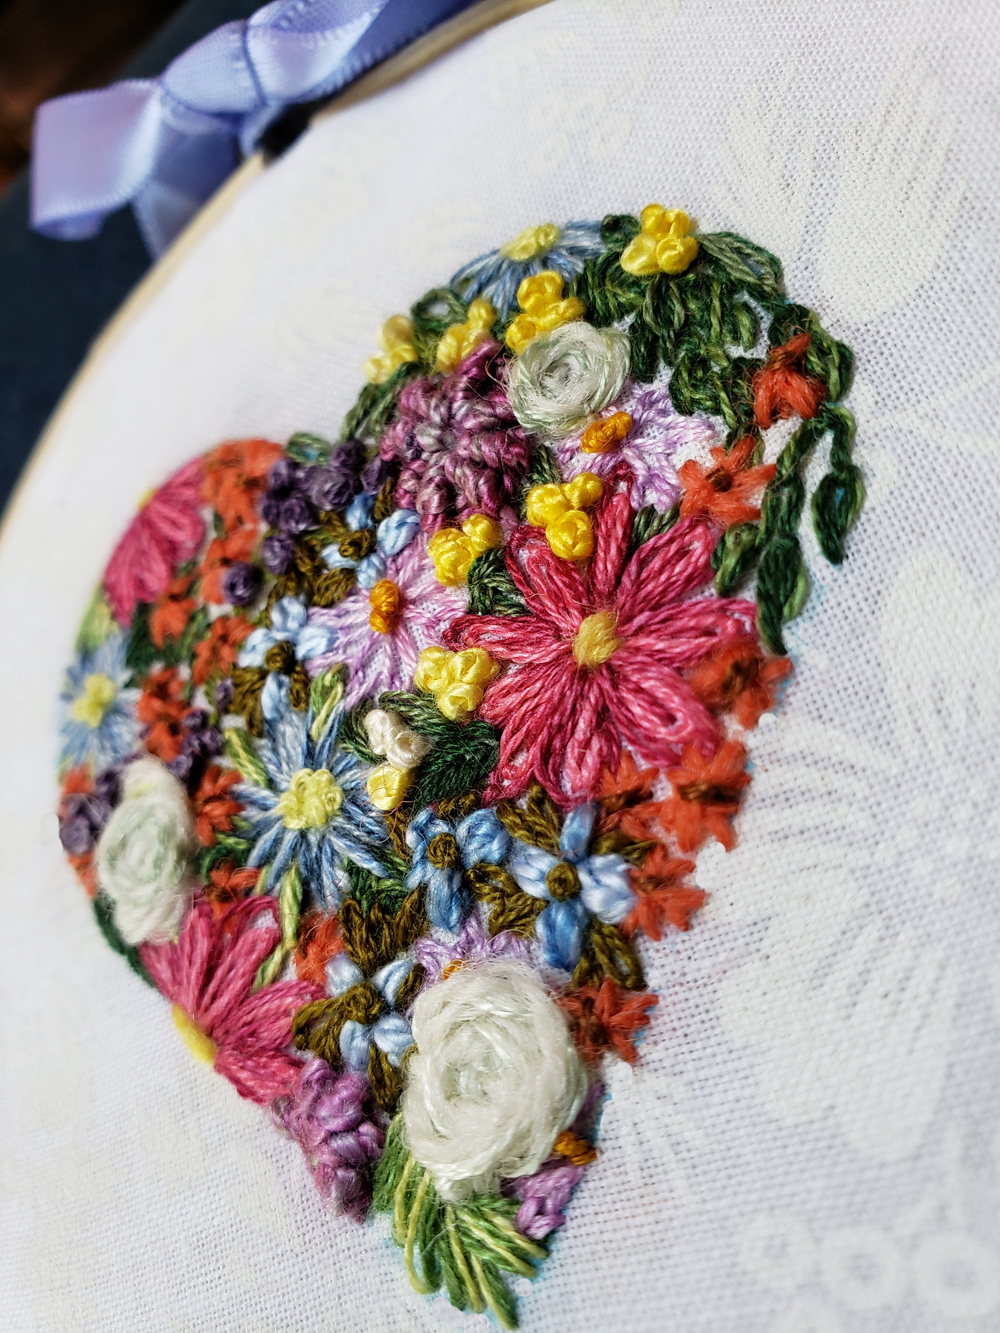 embroidered heart filled with flowers and leaves